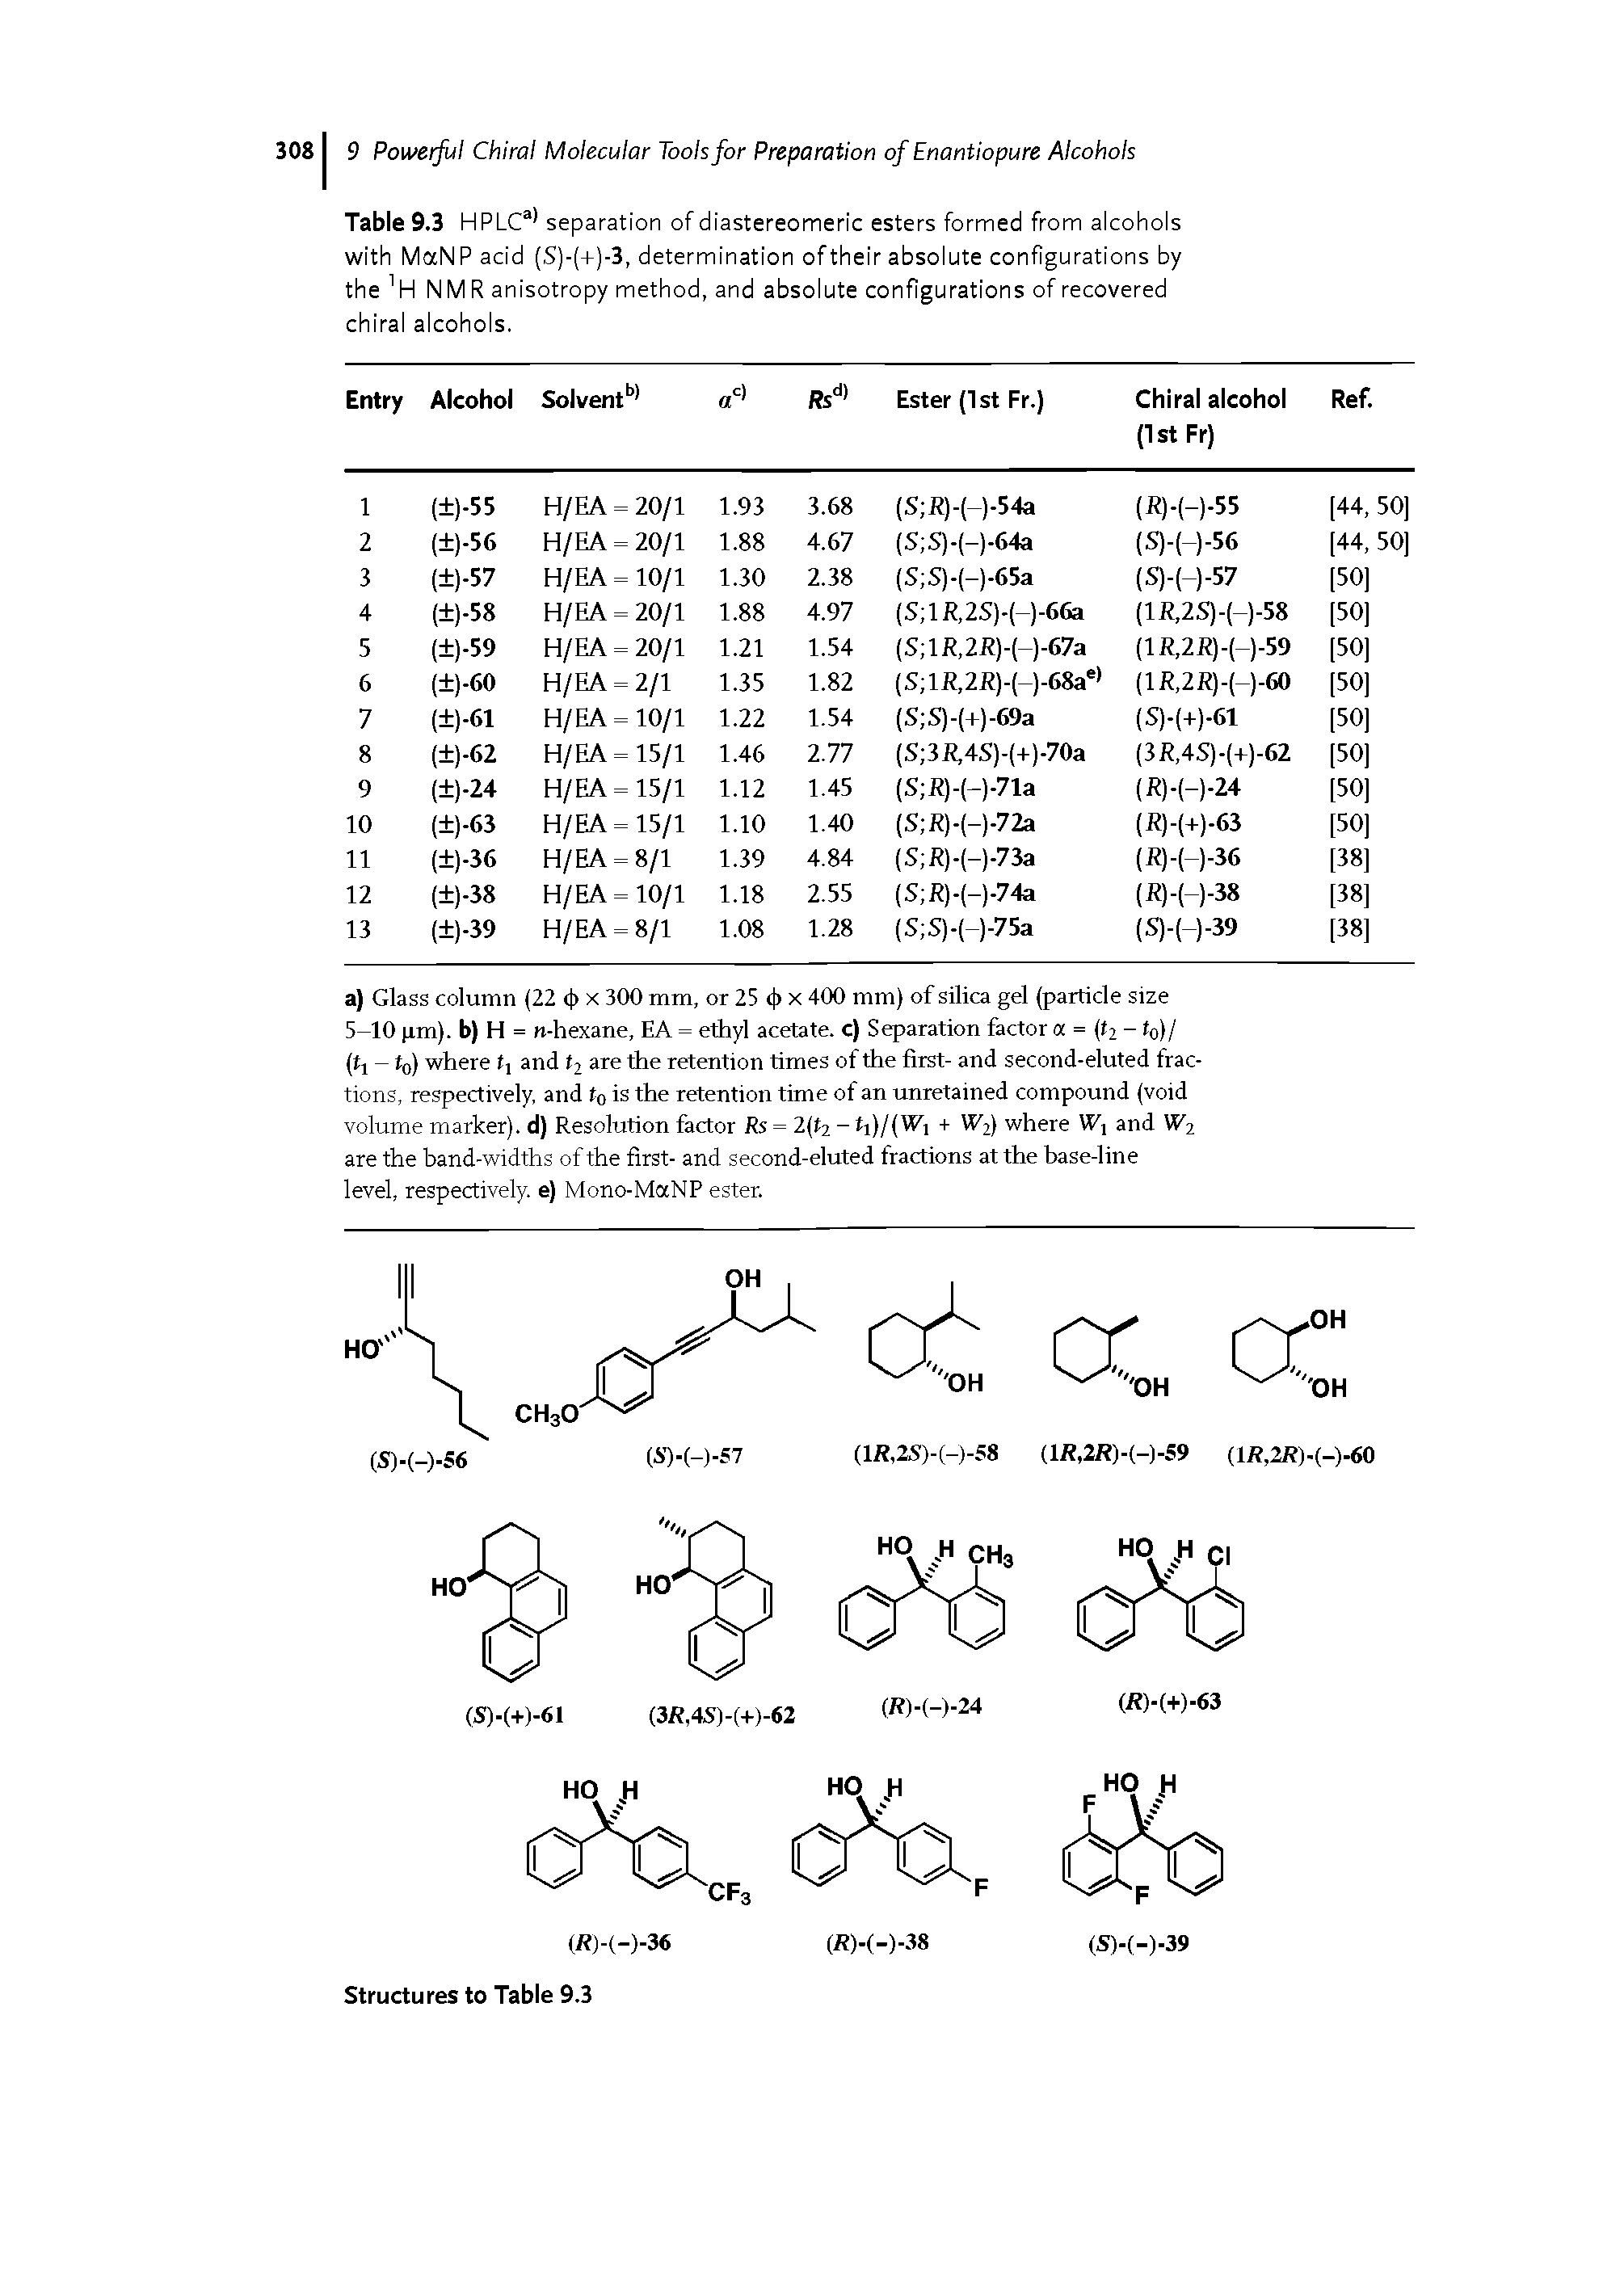 Table 9.3 HPLC > separation of diastereomeric esters formed from alcohols with MaNP acid (S)-(+)-3, determination of their absolute configurations by the H NMR anisotropy method, and absolute configurations of recovered chiral alcohols.